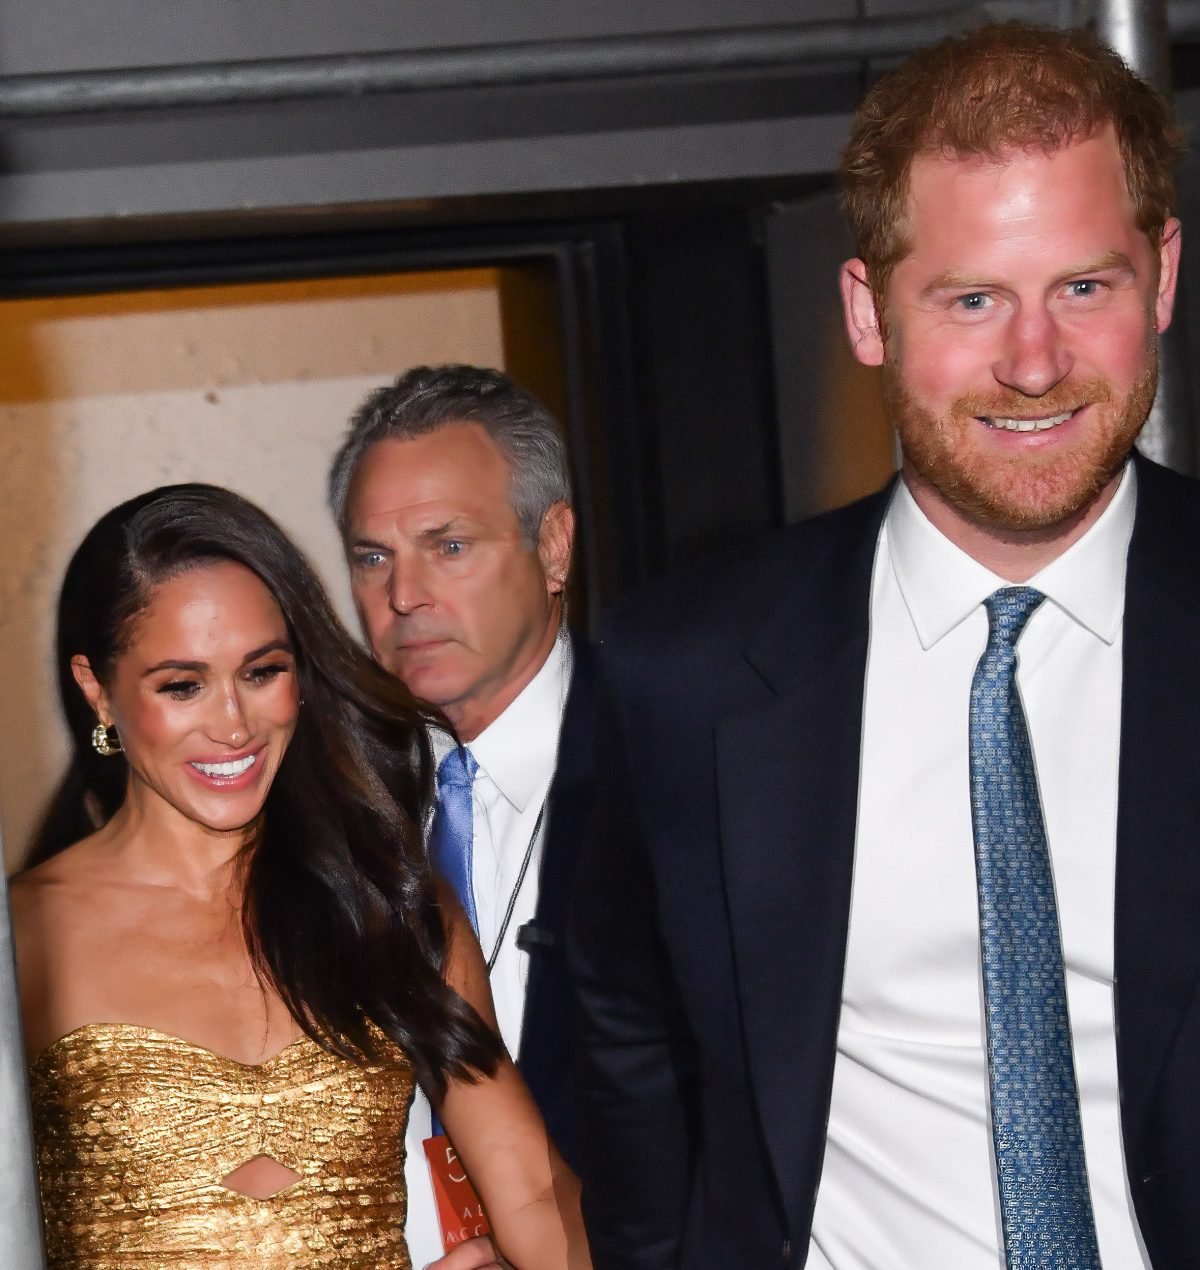 Meghan Markle and Prince Harry smiling as they leave The Ziegfeld Theatre